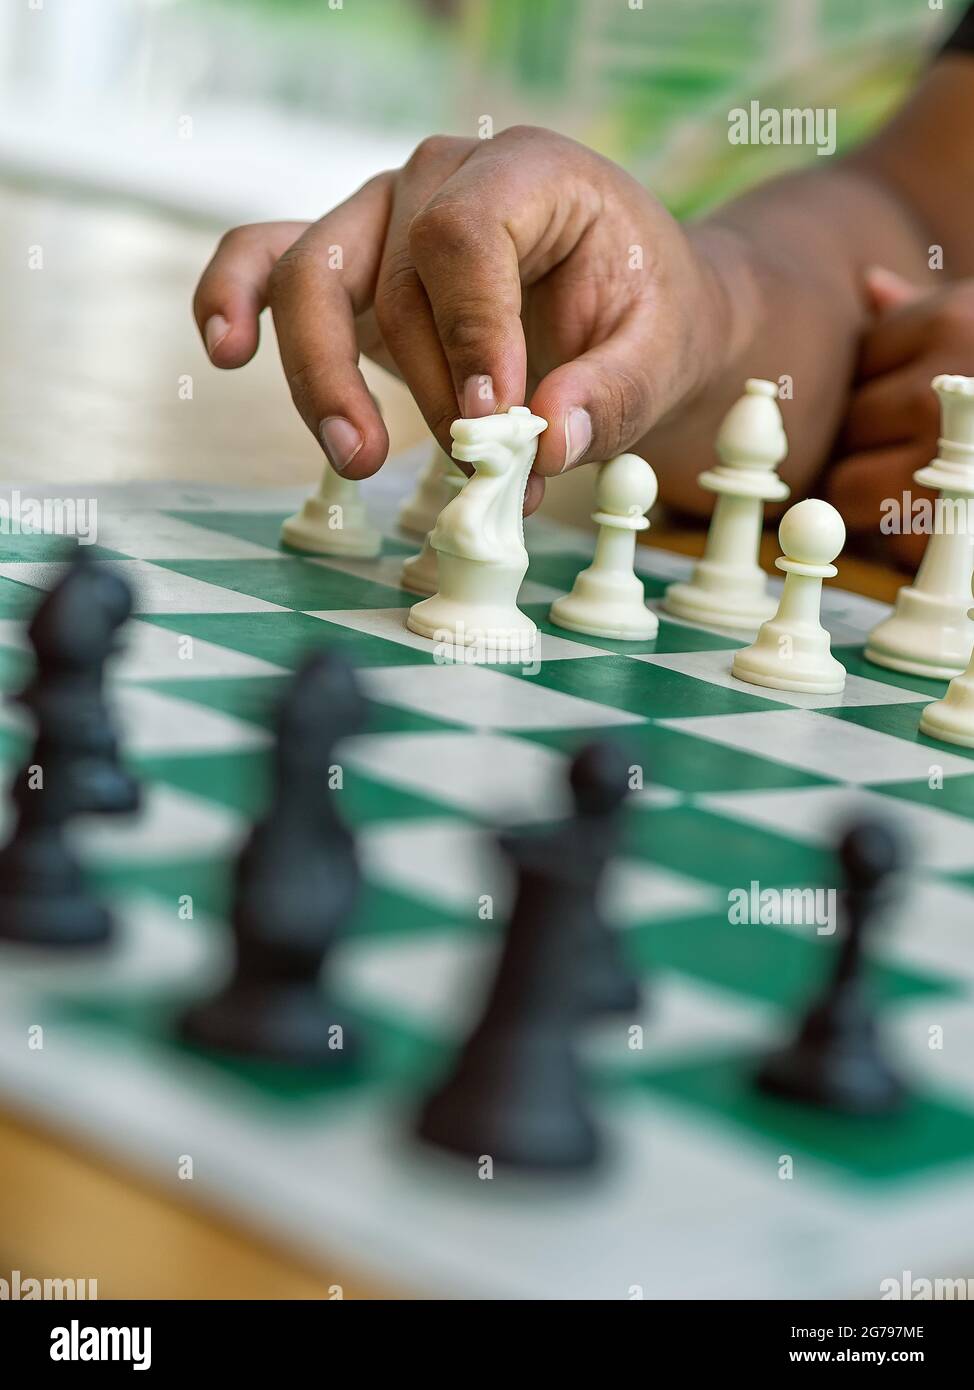 Chess game on a green board, a hand holds a white knight Stock Photo